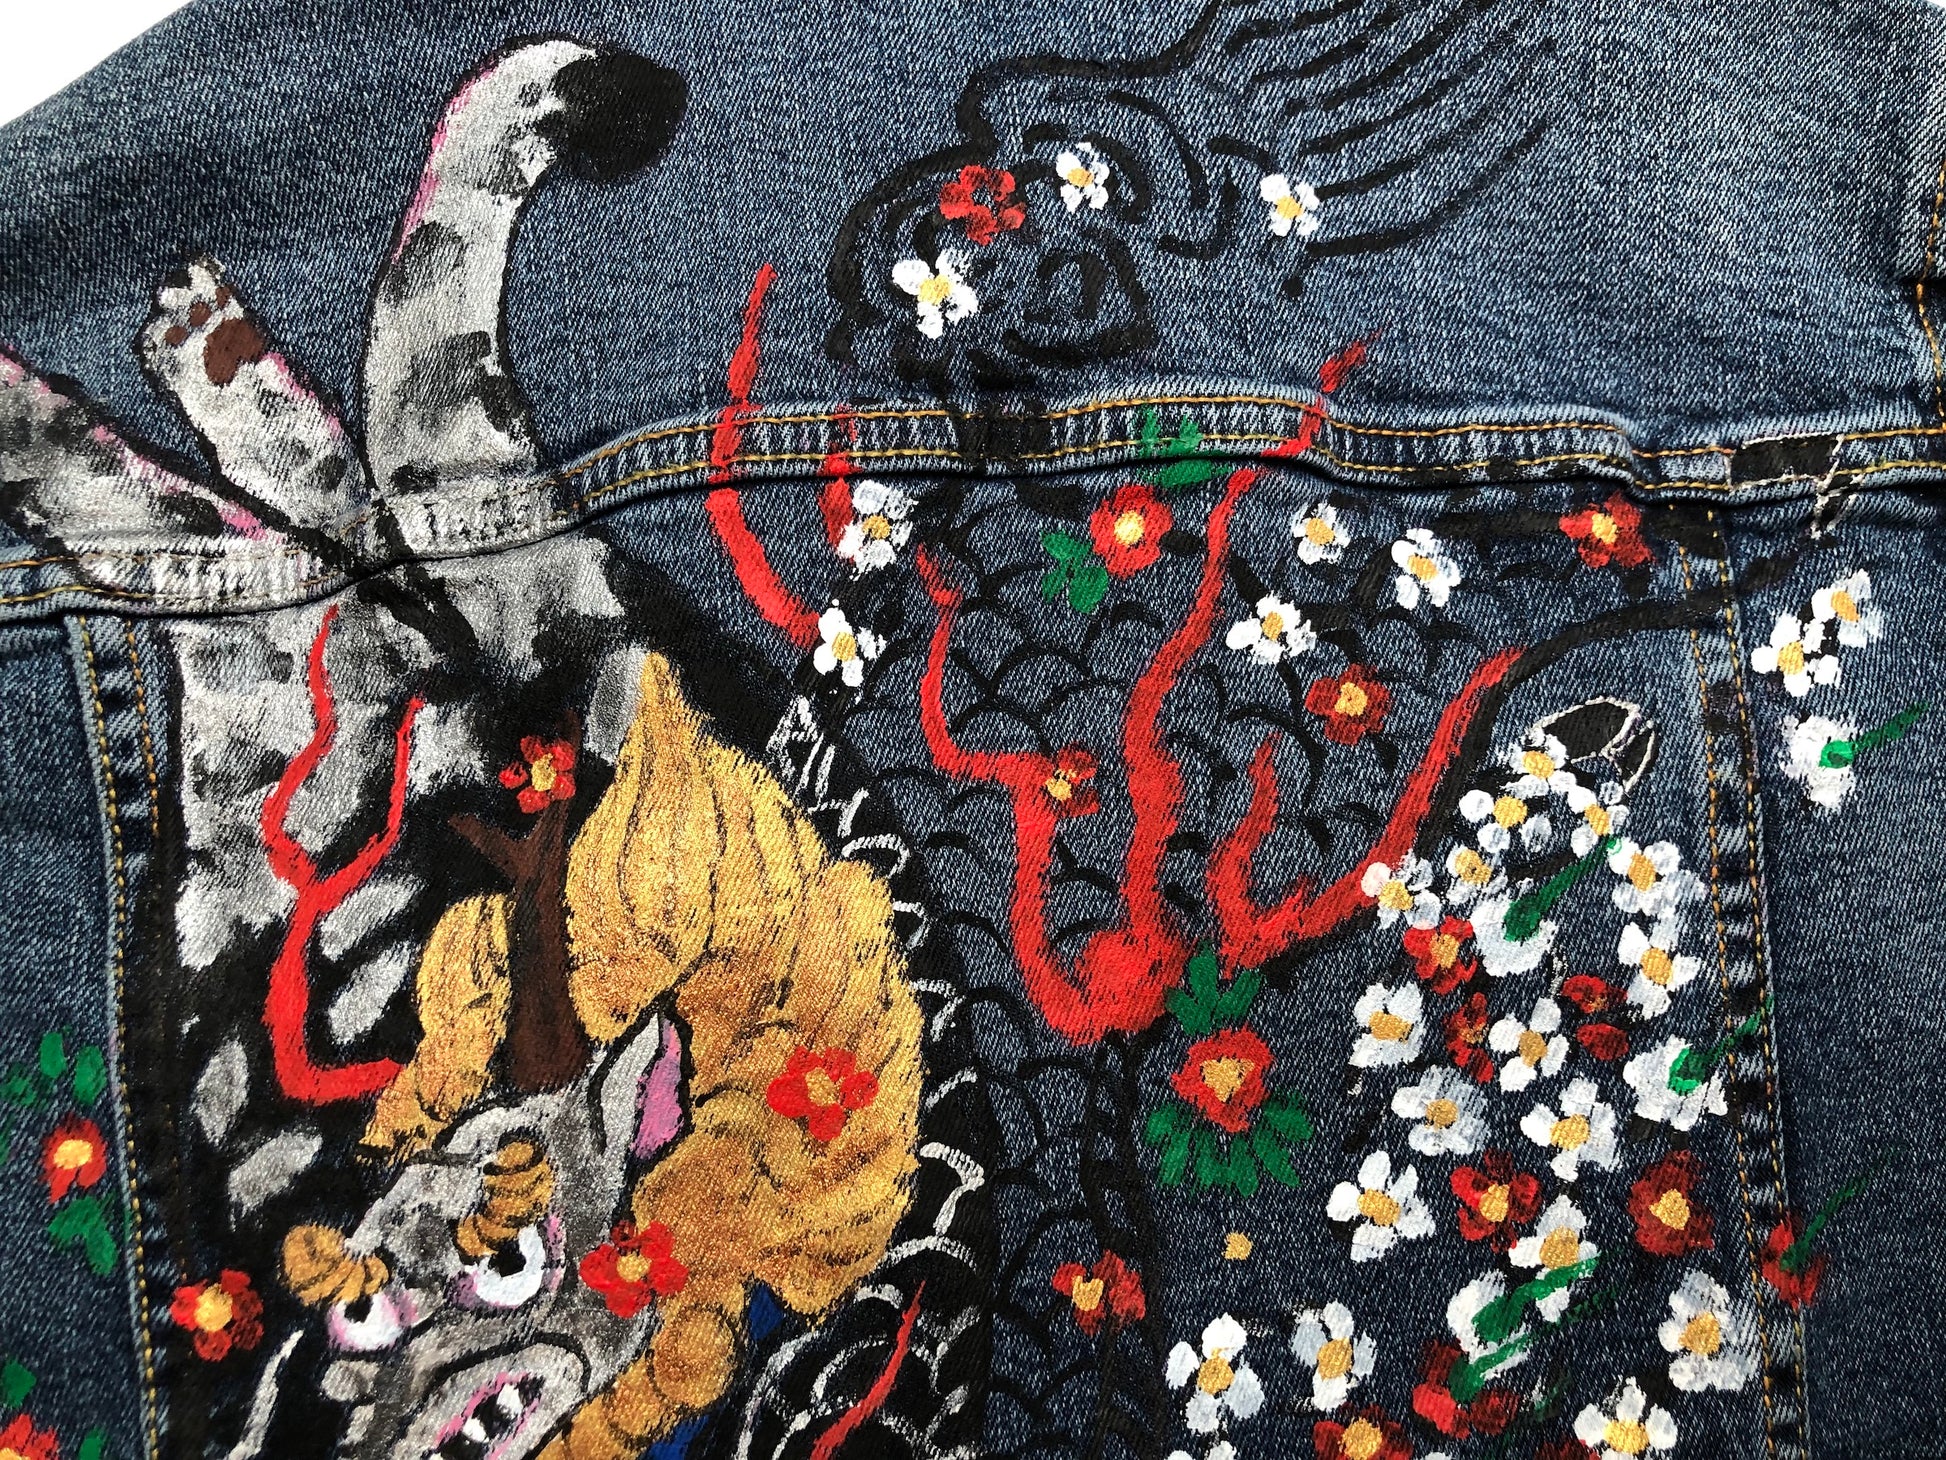 The tail of a cat and a demon on a women's denim jacket reverse side